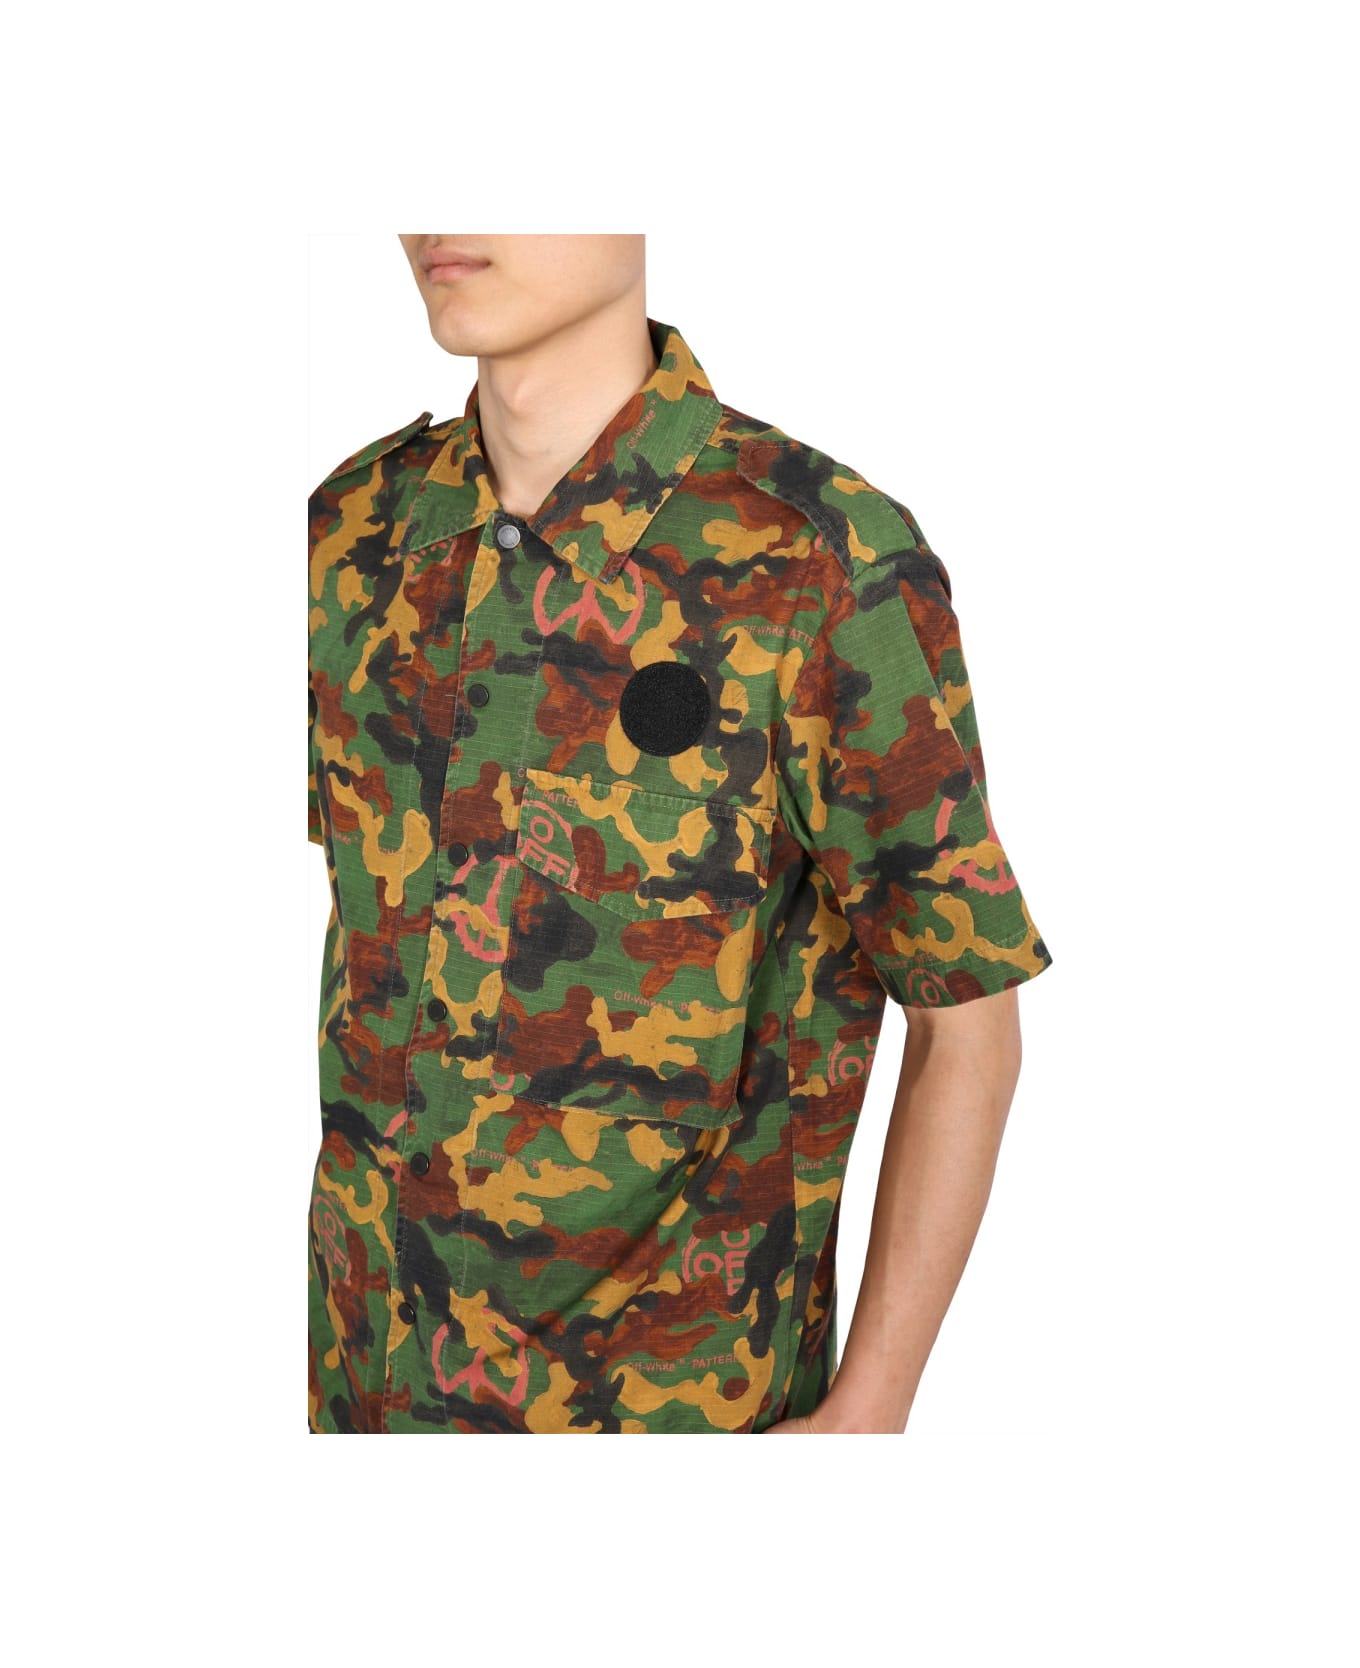 Off-White Camouflage Shirt - MILITARY GREEN シャツ